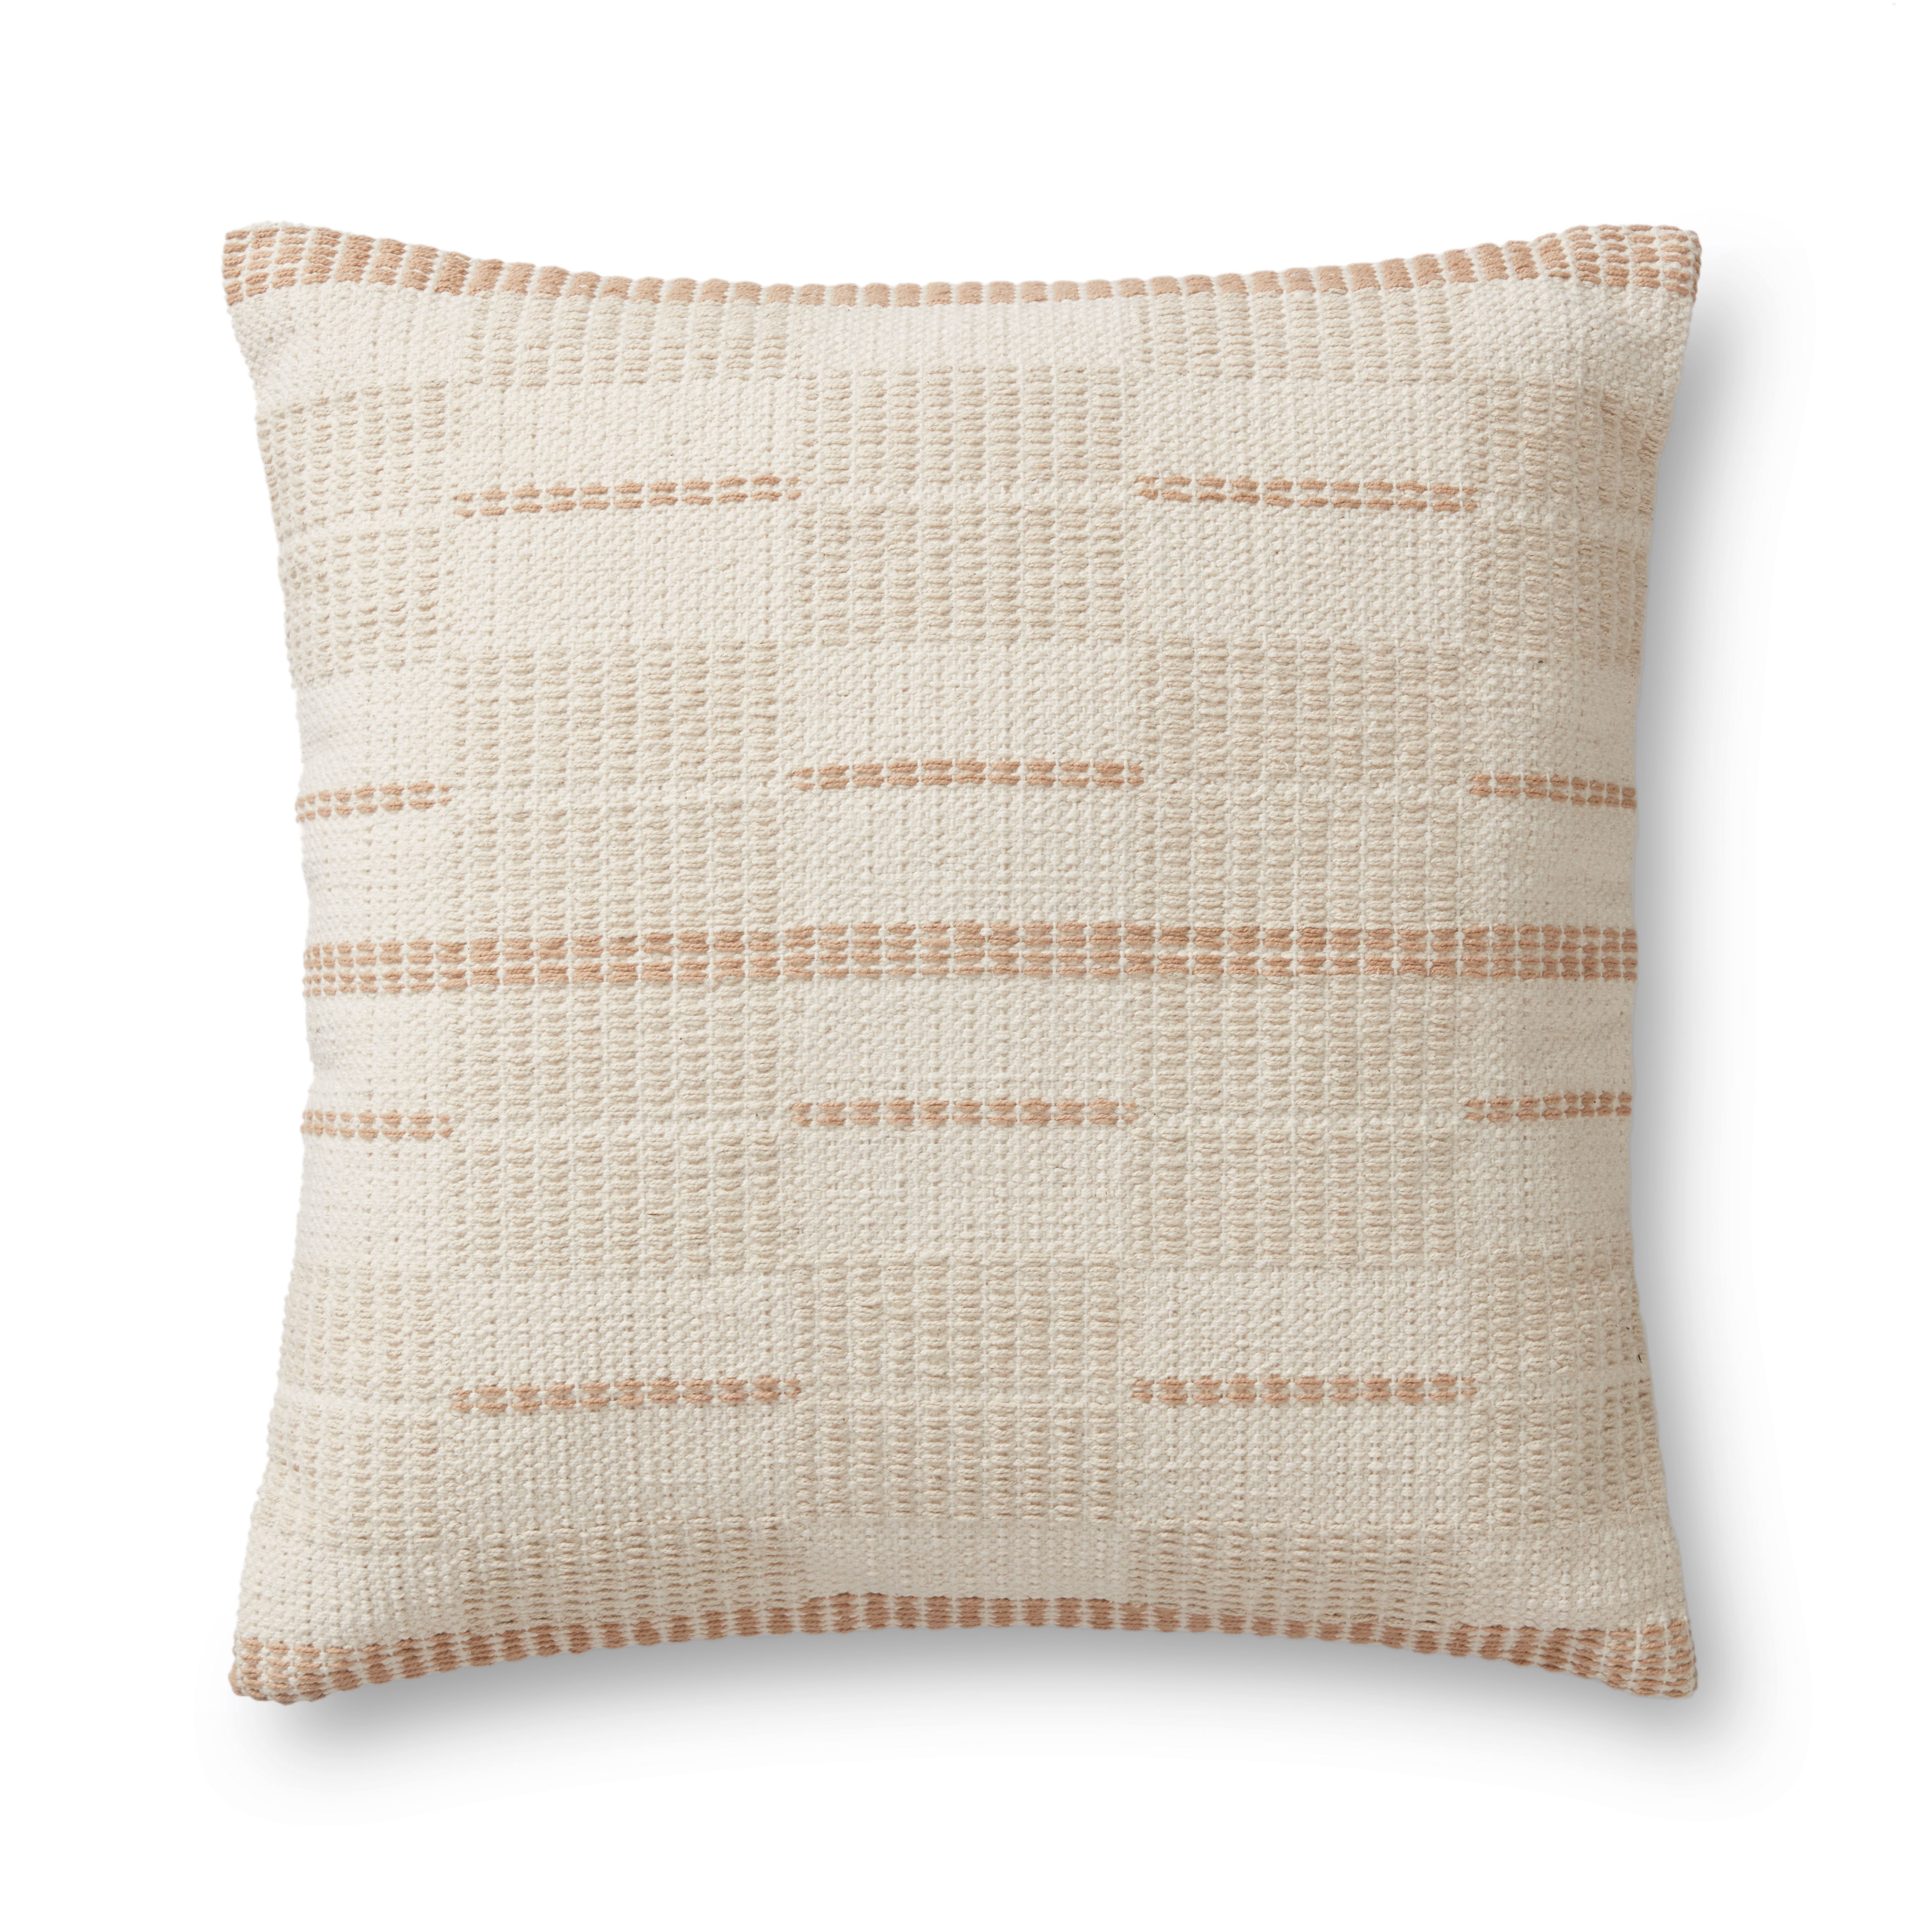 PILLOWS P1171 MULTI 22" x 22" Cover w/Poly - Magnolia Home by Joana Gaines Crafted by Loloi Rugs